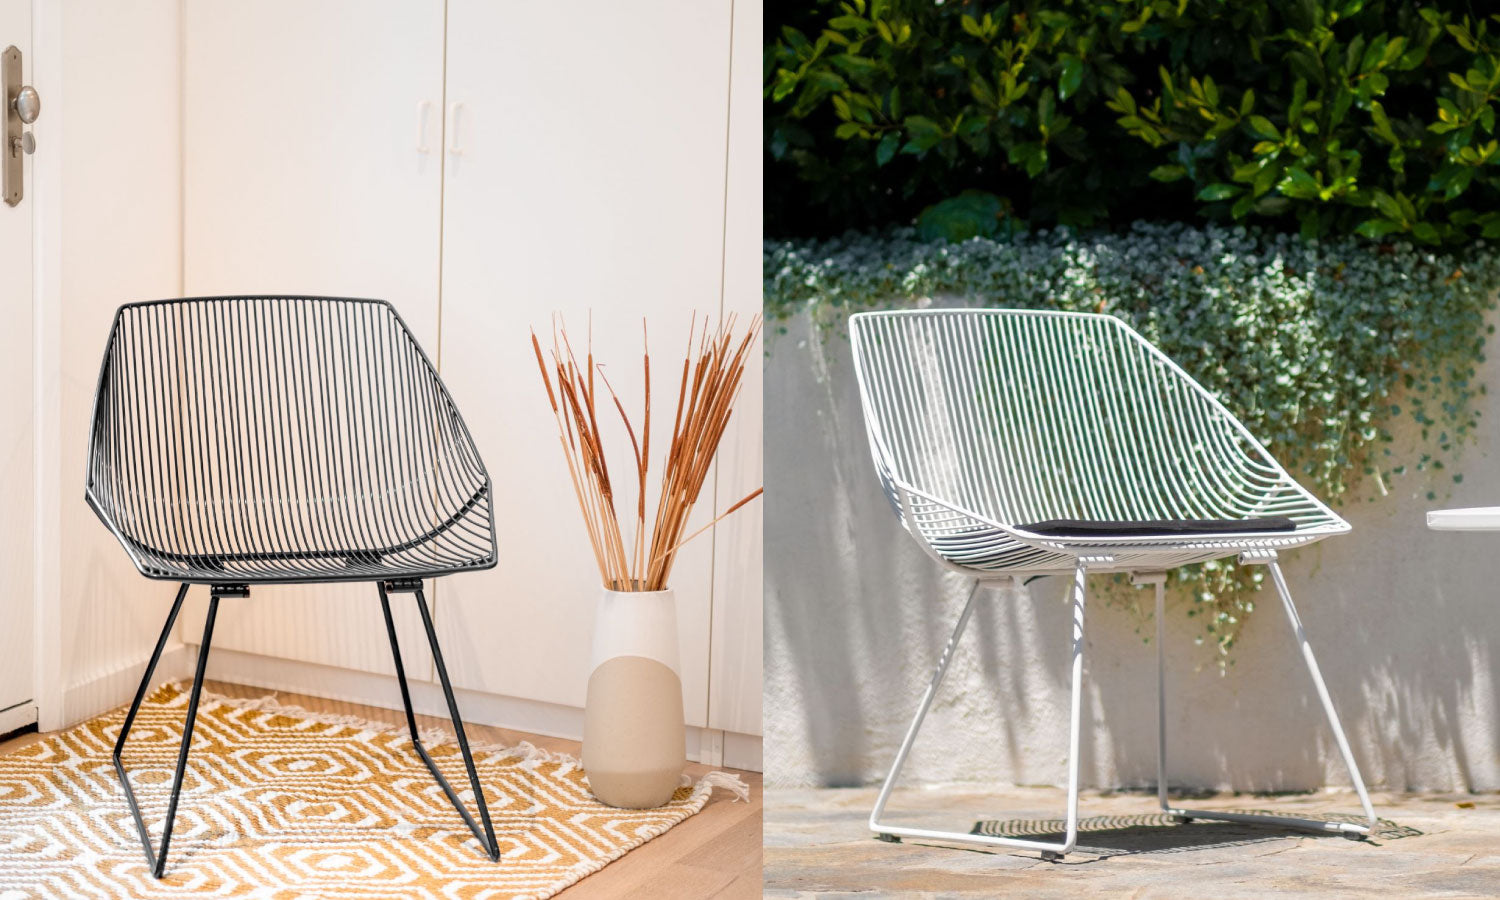 The Bunny Lounge chair, a wire design featured in Black and White colors.